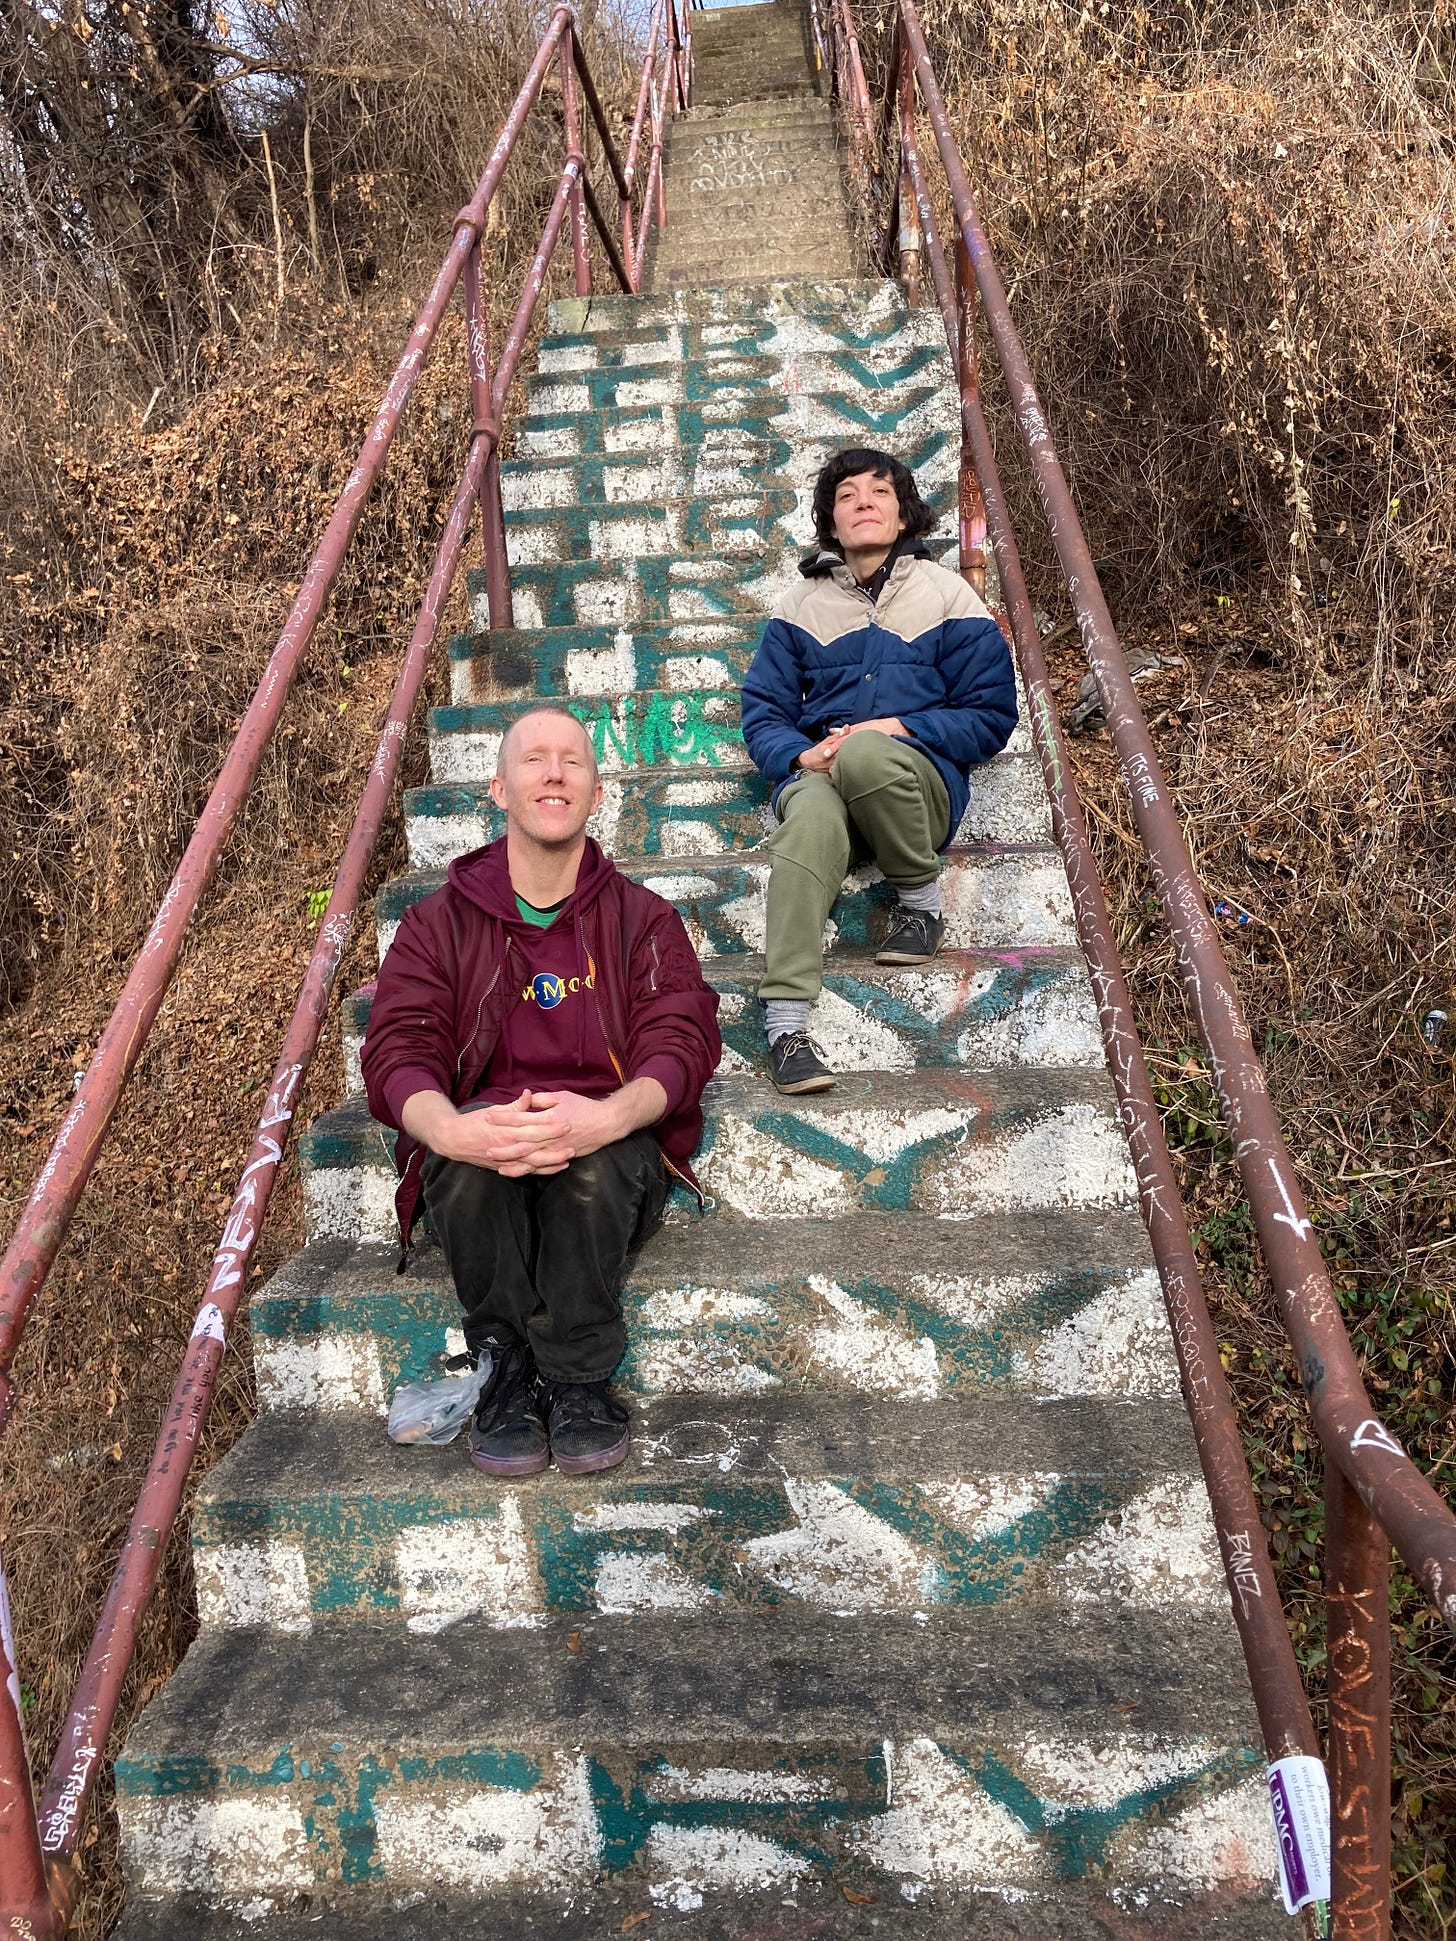 IMG DESCRIPTION: two white people sitting on a rusty run down set of concrete steps. The word "TRY" is painted on every step. They are surrounded by dead knotweed. They are smiling.